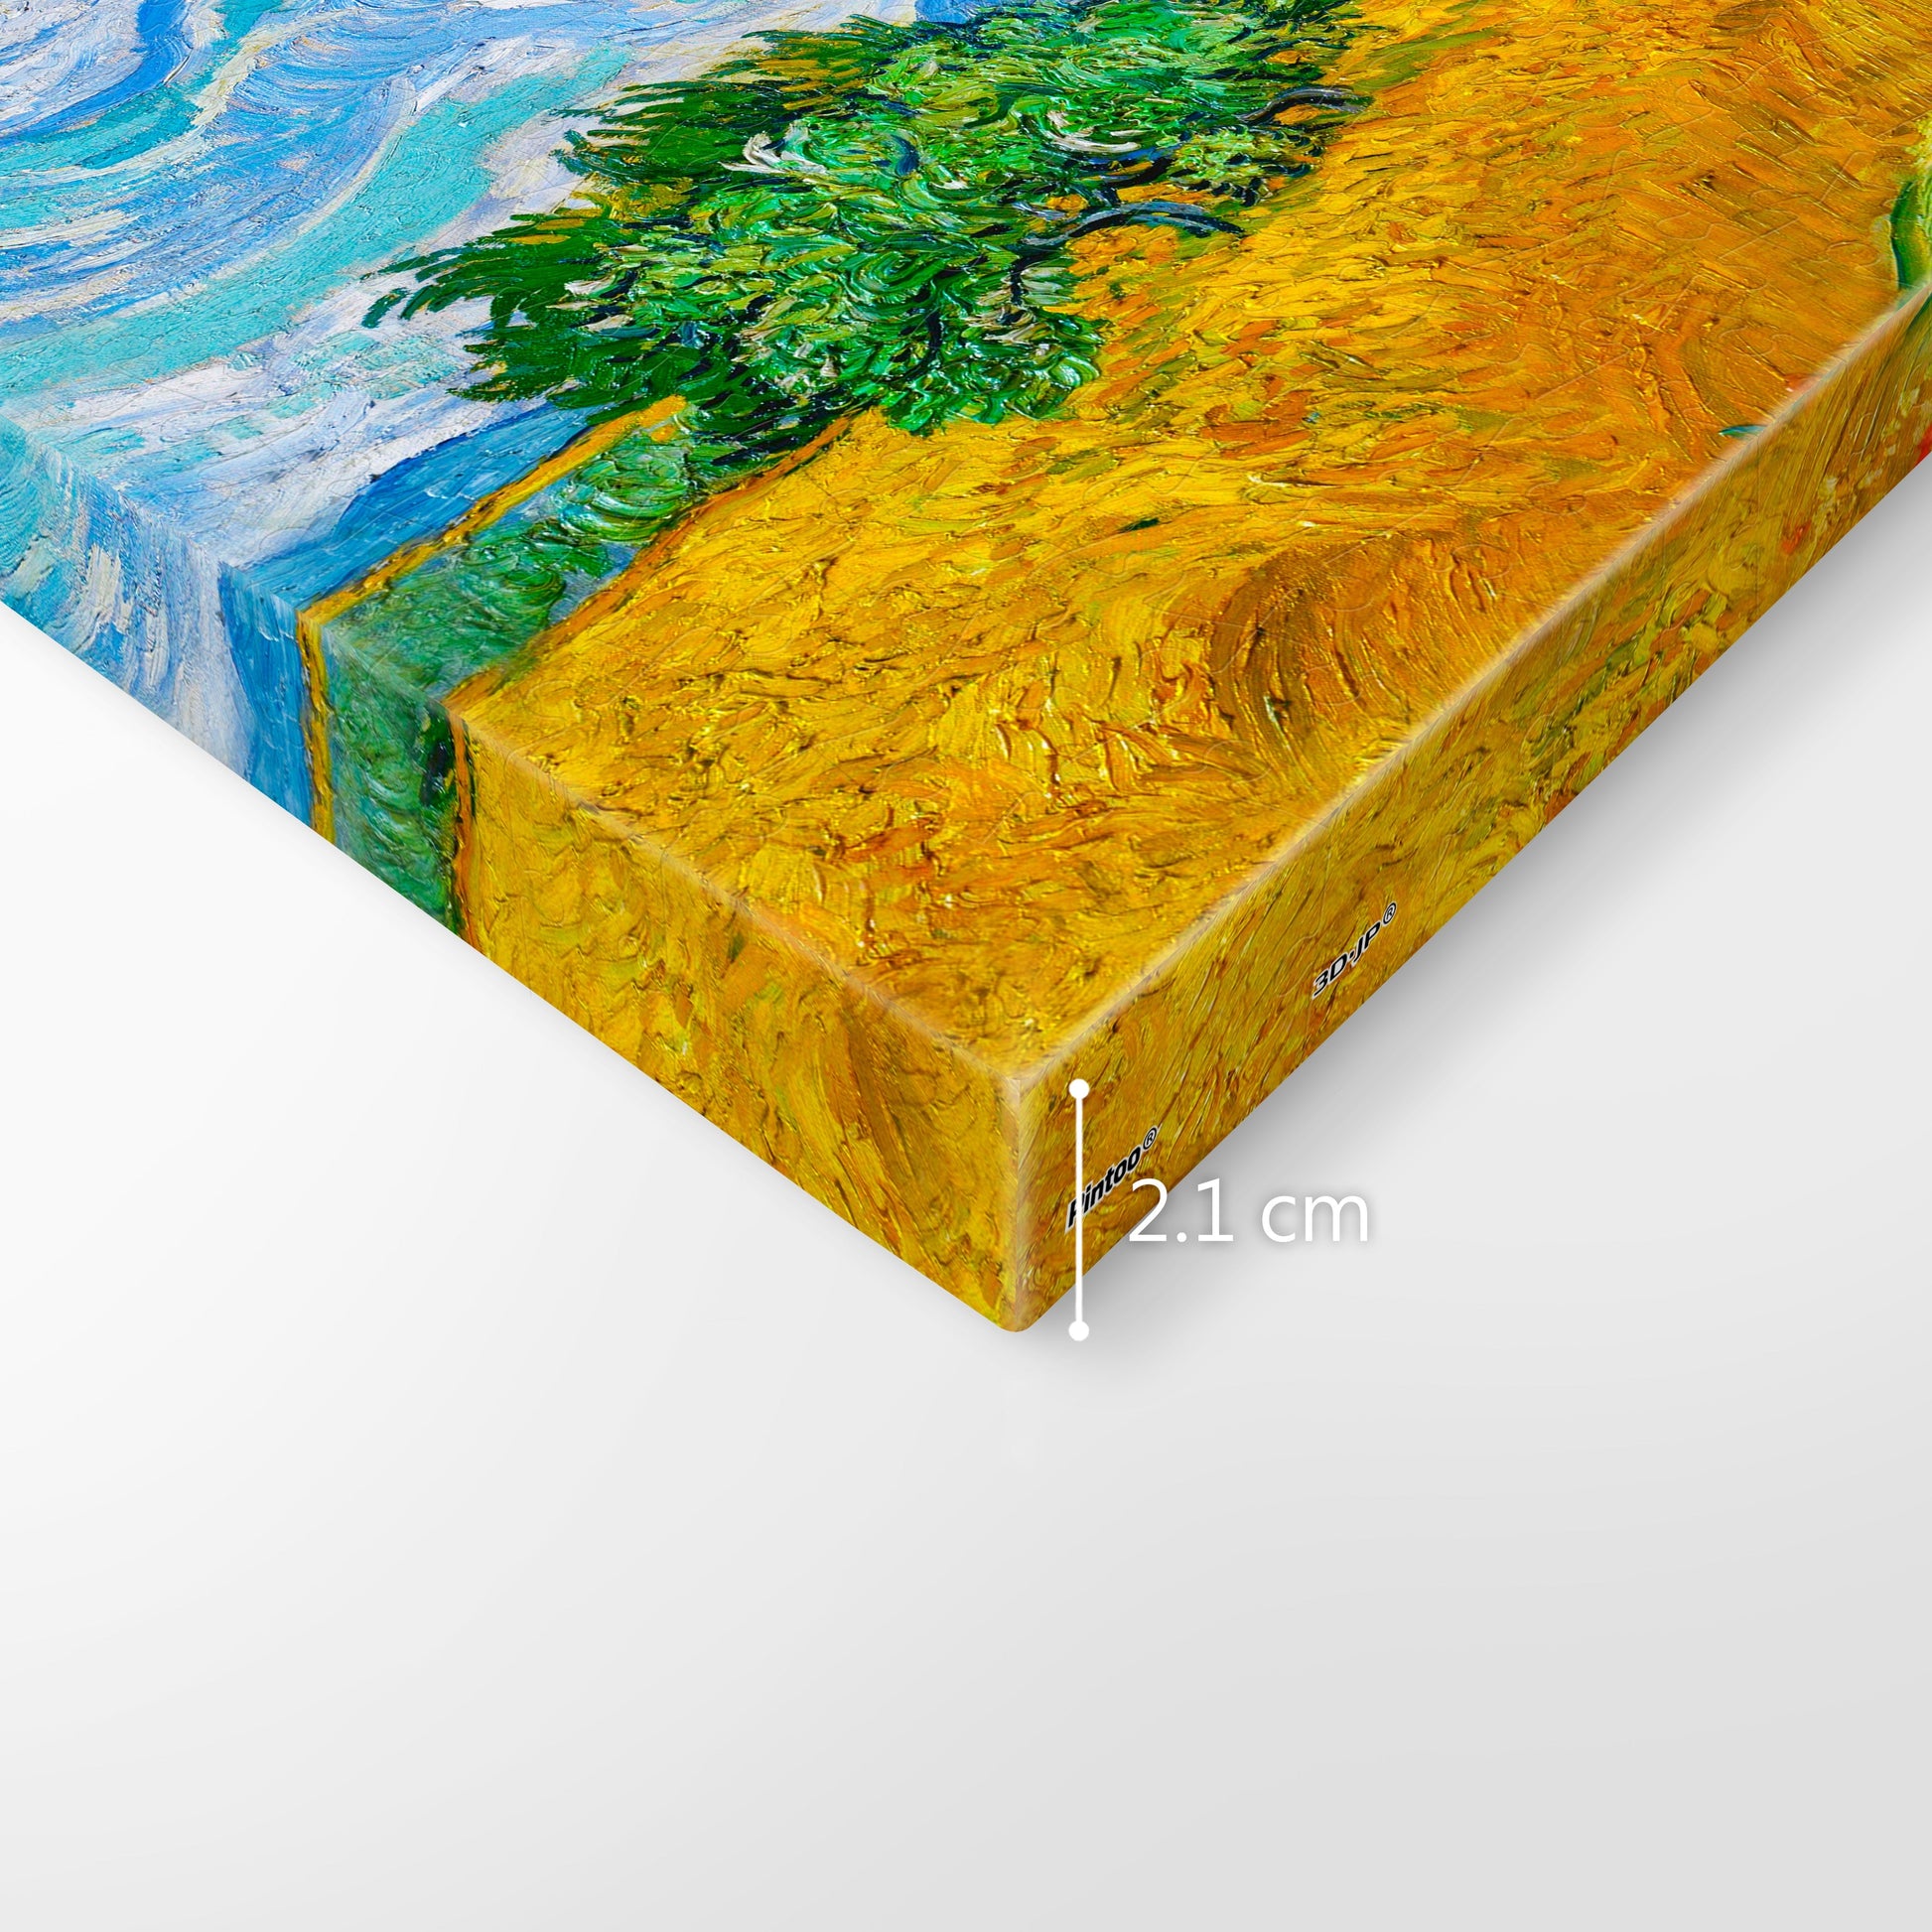 Wheat Field with Cypresses - 366 Piece Jigsaw Puzzle